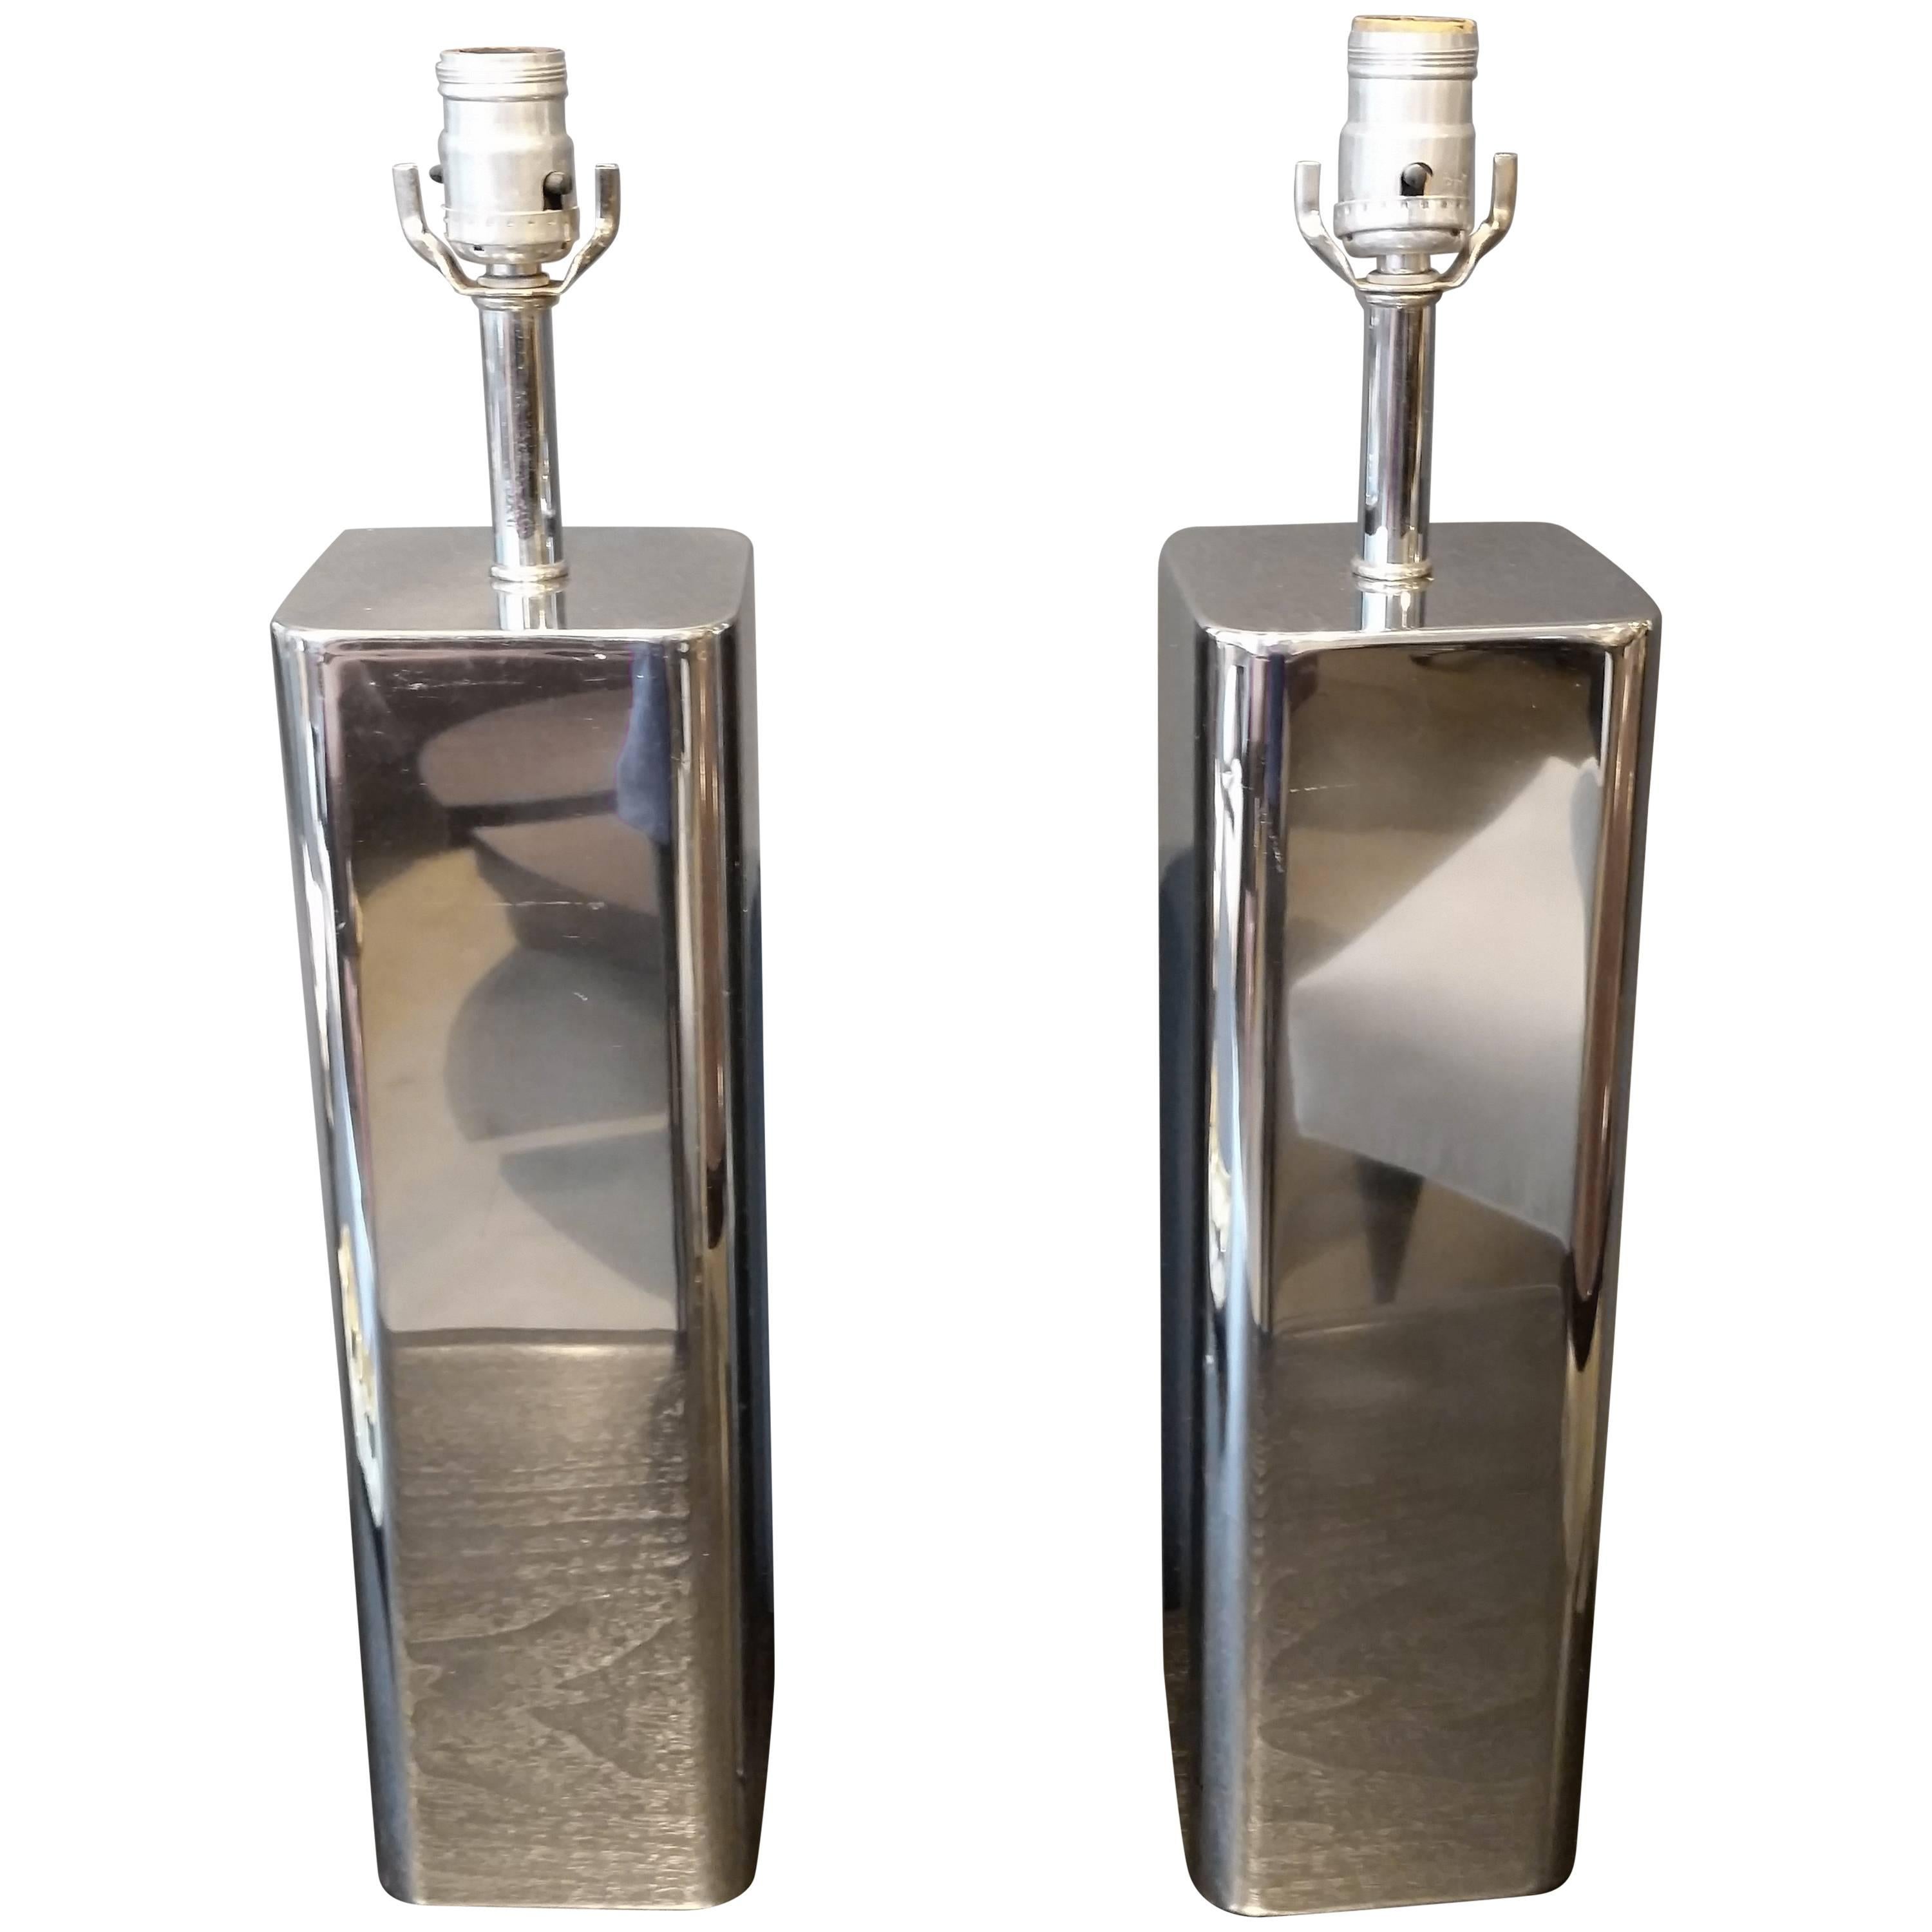 Handsome pair of polished nickel or chrome table lamps, 1970s. High-quality seamless construction would go well with nearly any interior design style. In very good vintage condition with very minor wear, not noticeable in use. 
Height is 21.5